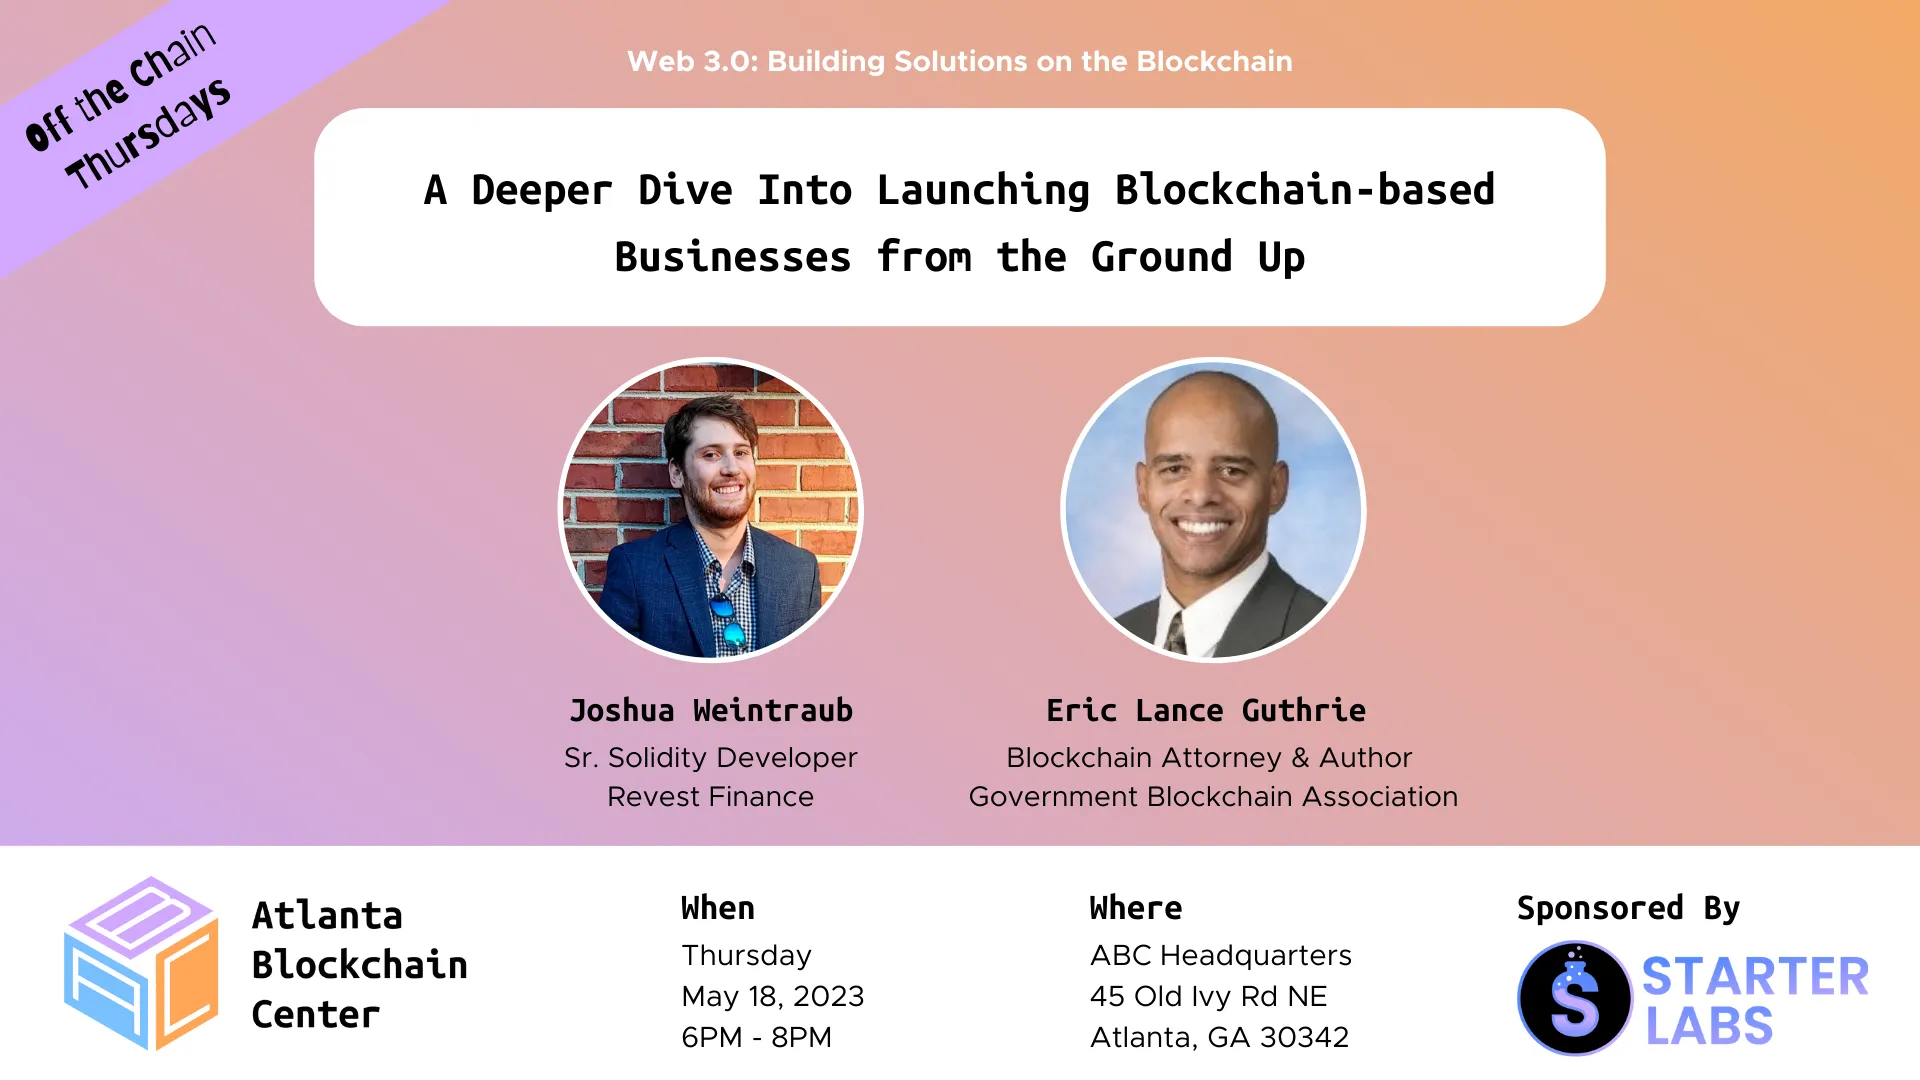 A Deeper Dive Into Launching Blockchain-based Businesses from the Ground Up